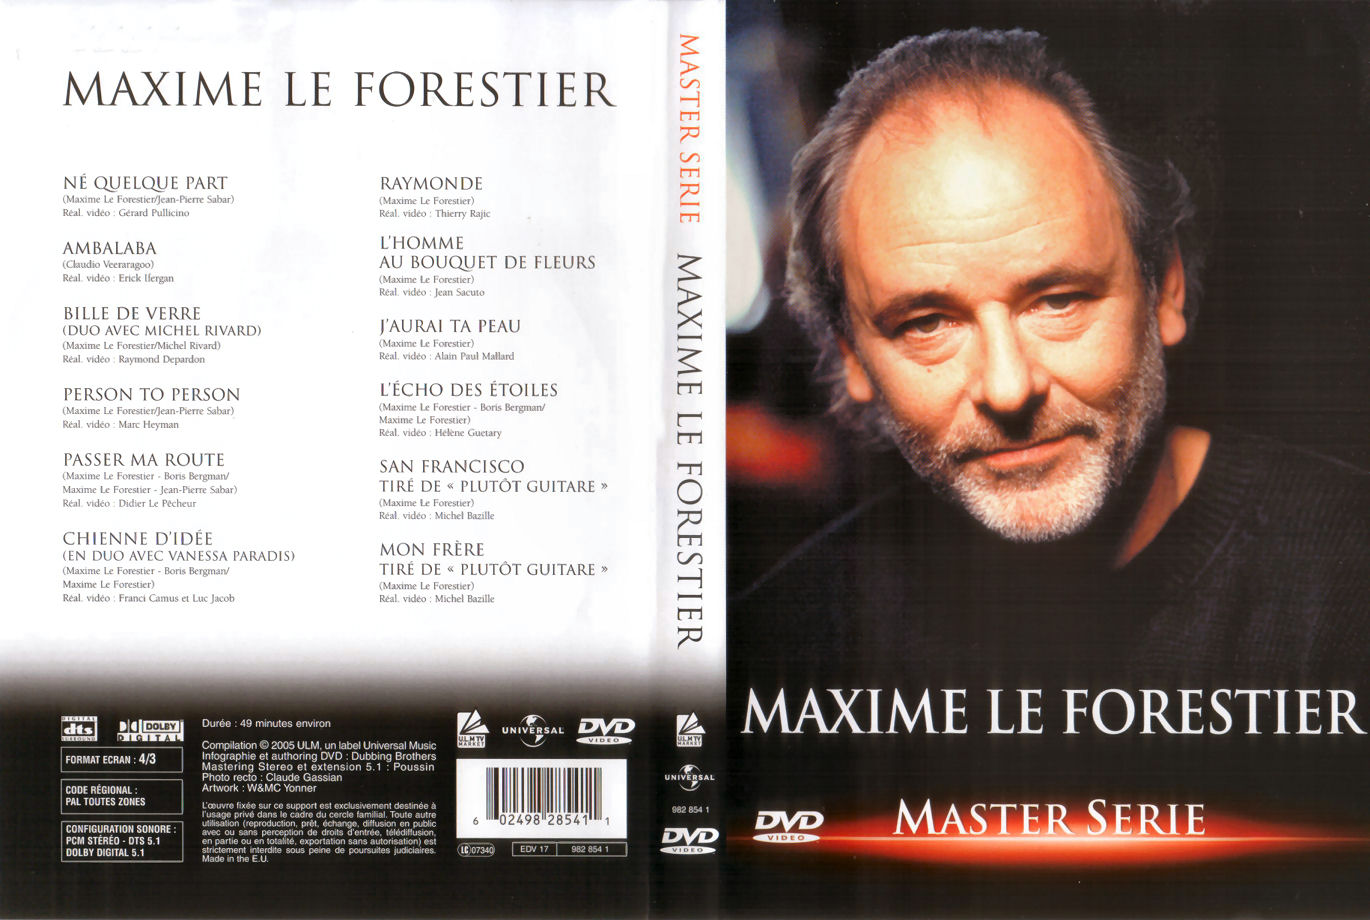 Jaquette DVD Maxime Le Forestier - Master Serie